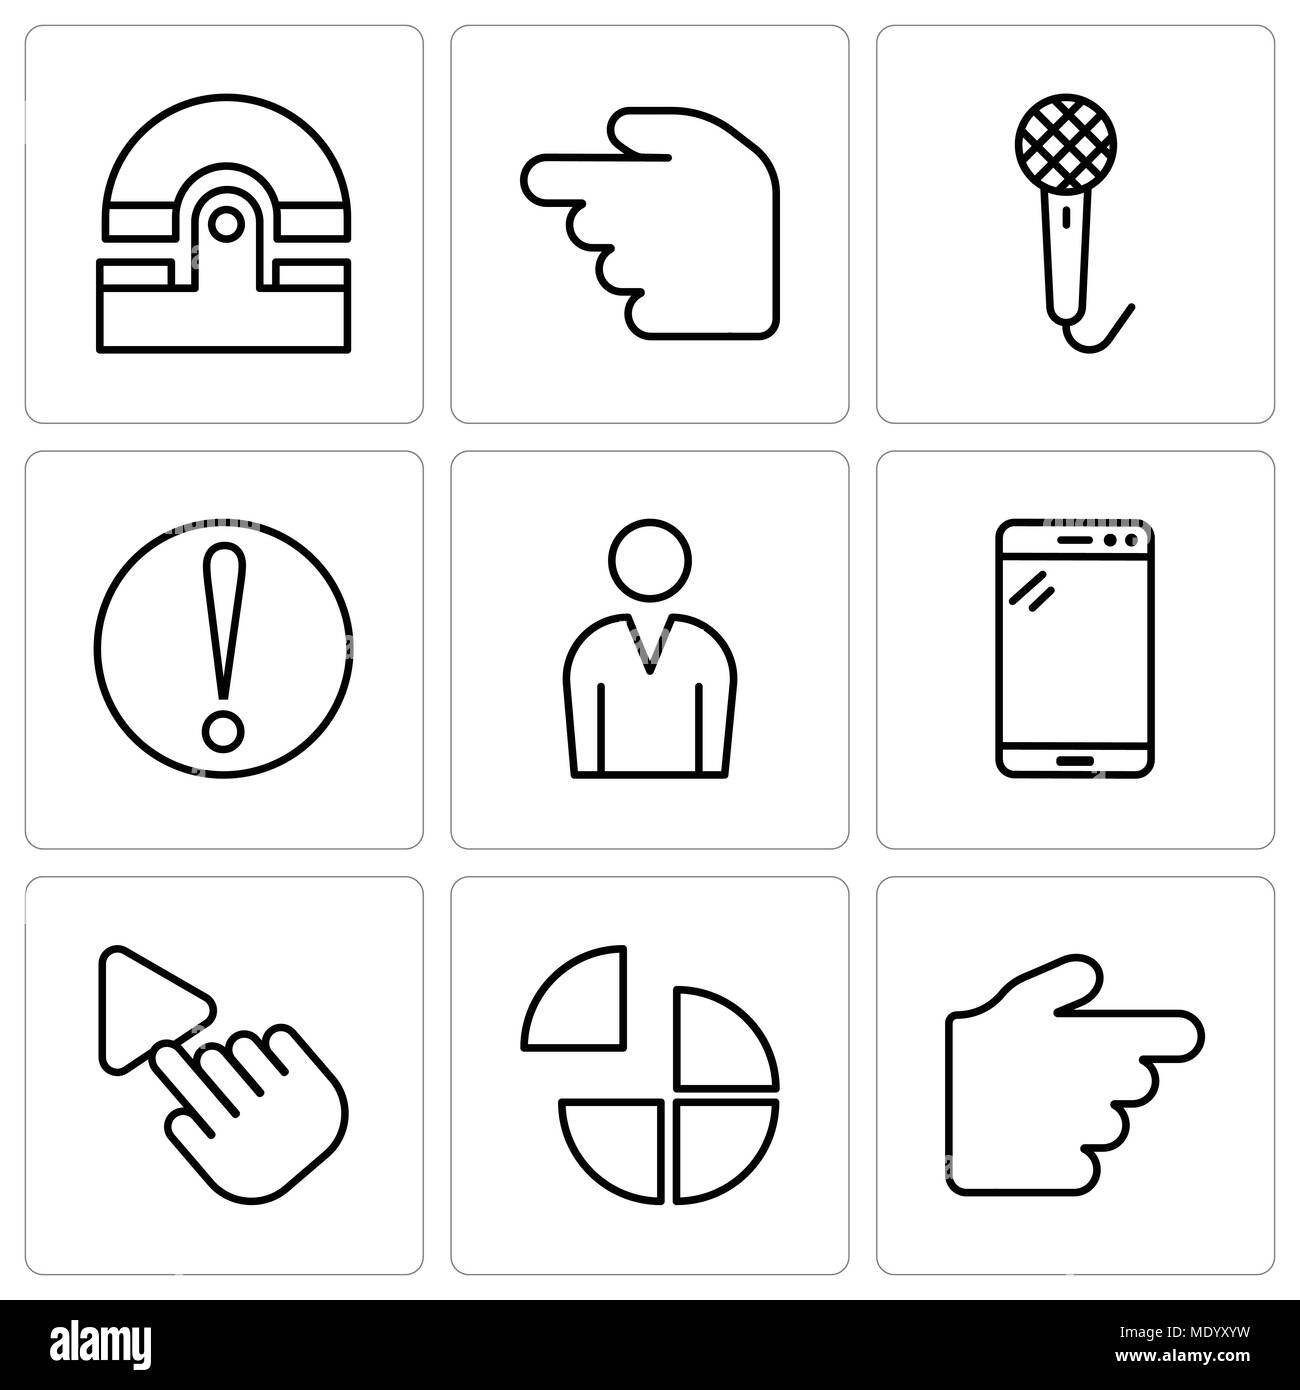 Set Of 9 simple editable icons such as Hand pointing to right, Pie chart, Selection Tool, Tablet, Male avatar, Caution, Voice recorder, Hourglass, Old Stock Vector